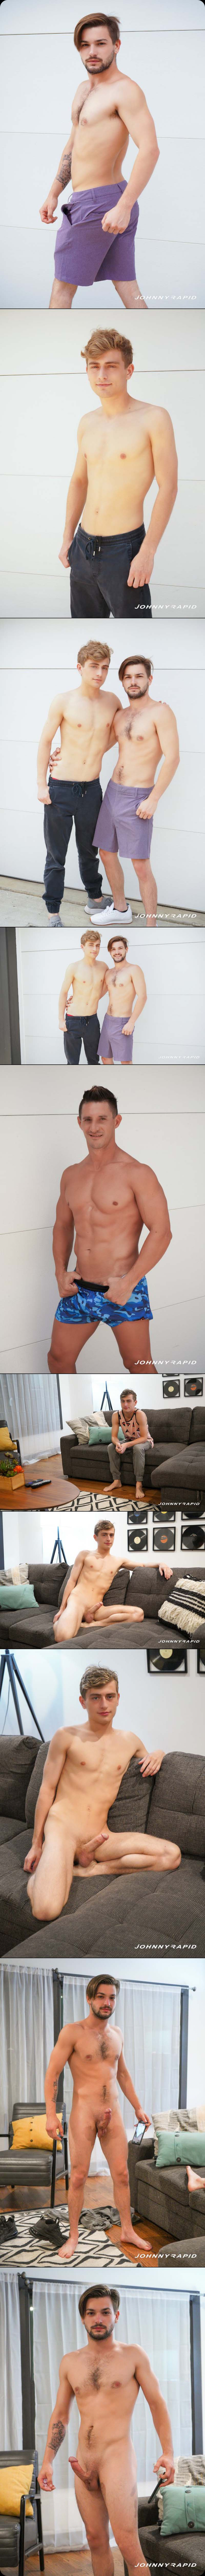 Gray Sweatpants and Chill (Jesse Bolton Bottoms For Johnny Rapid and Blows Jax Thirio) at JohnnyRapid.com